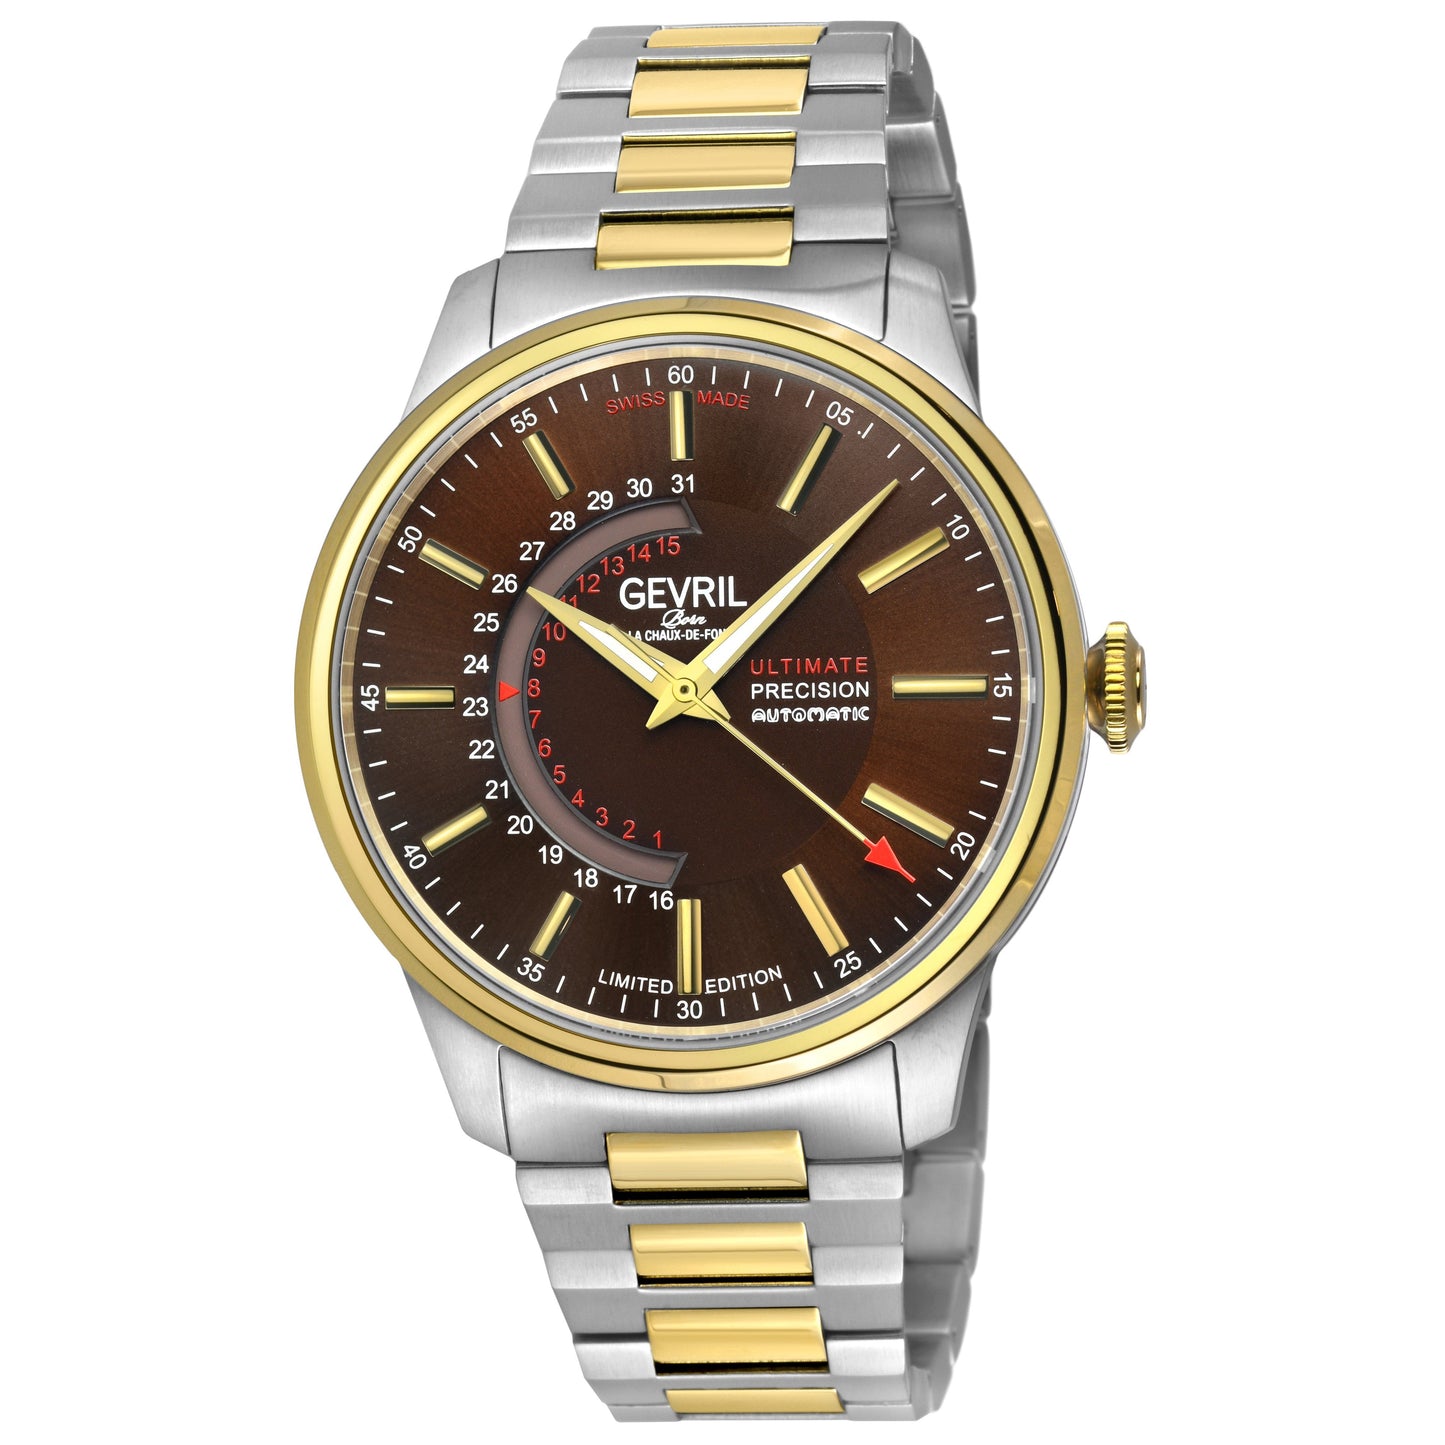 Gevril-Luxury-Swiss-Watches-Gevril Guggenheim Automatic-49206B